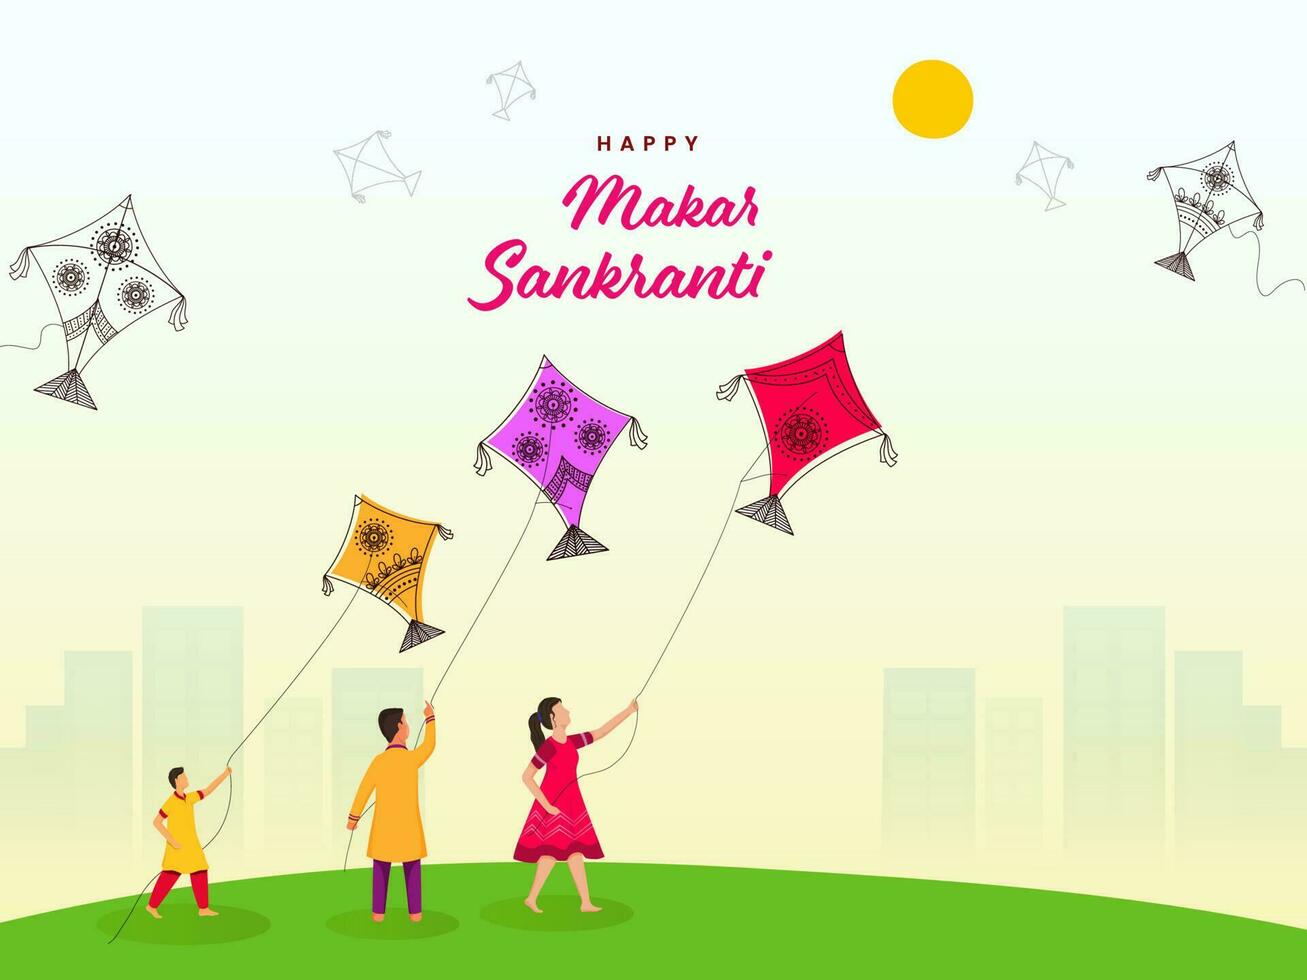 Happy Makar Sankranti Greeting Card With Indian Children Flying Kites And Sunshine Against Background. vector